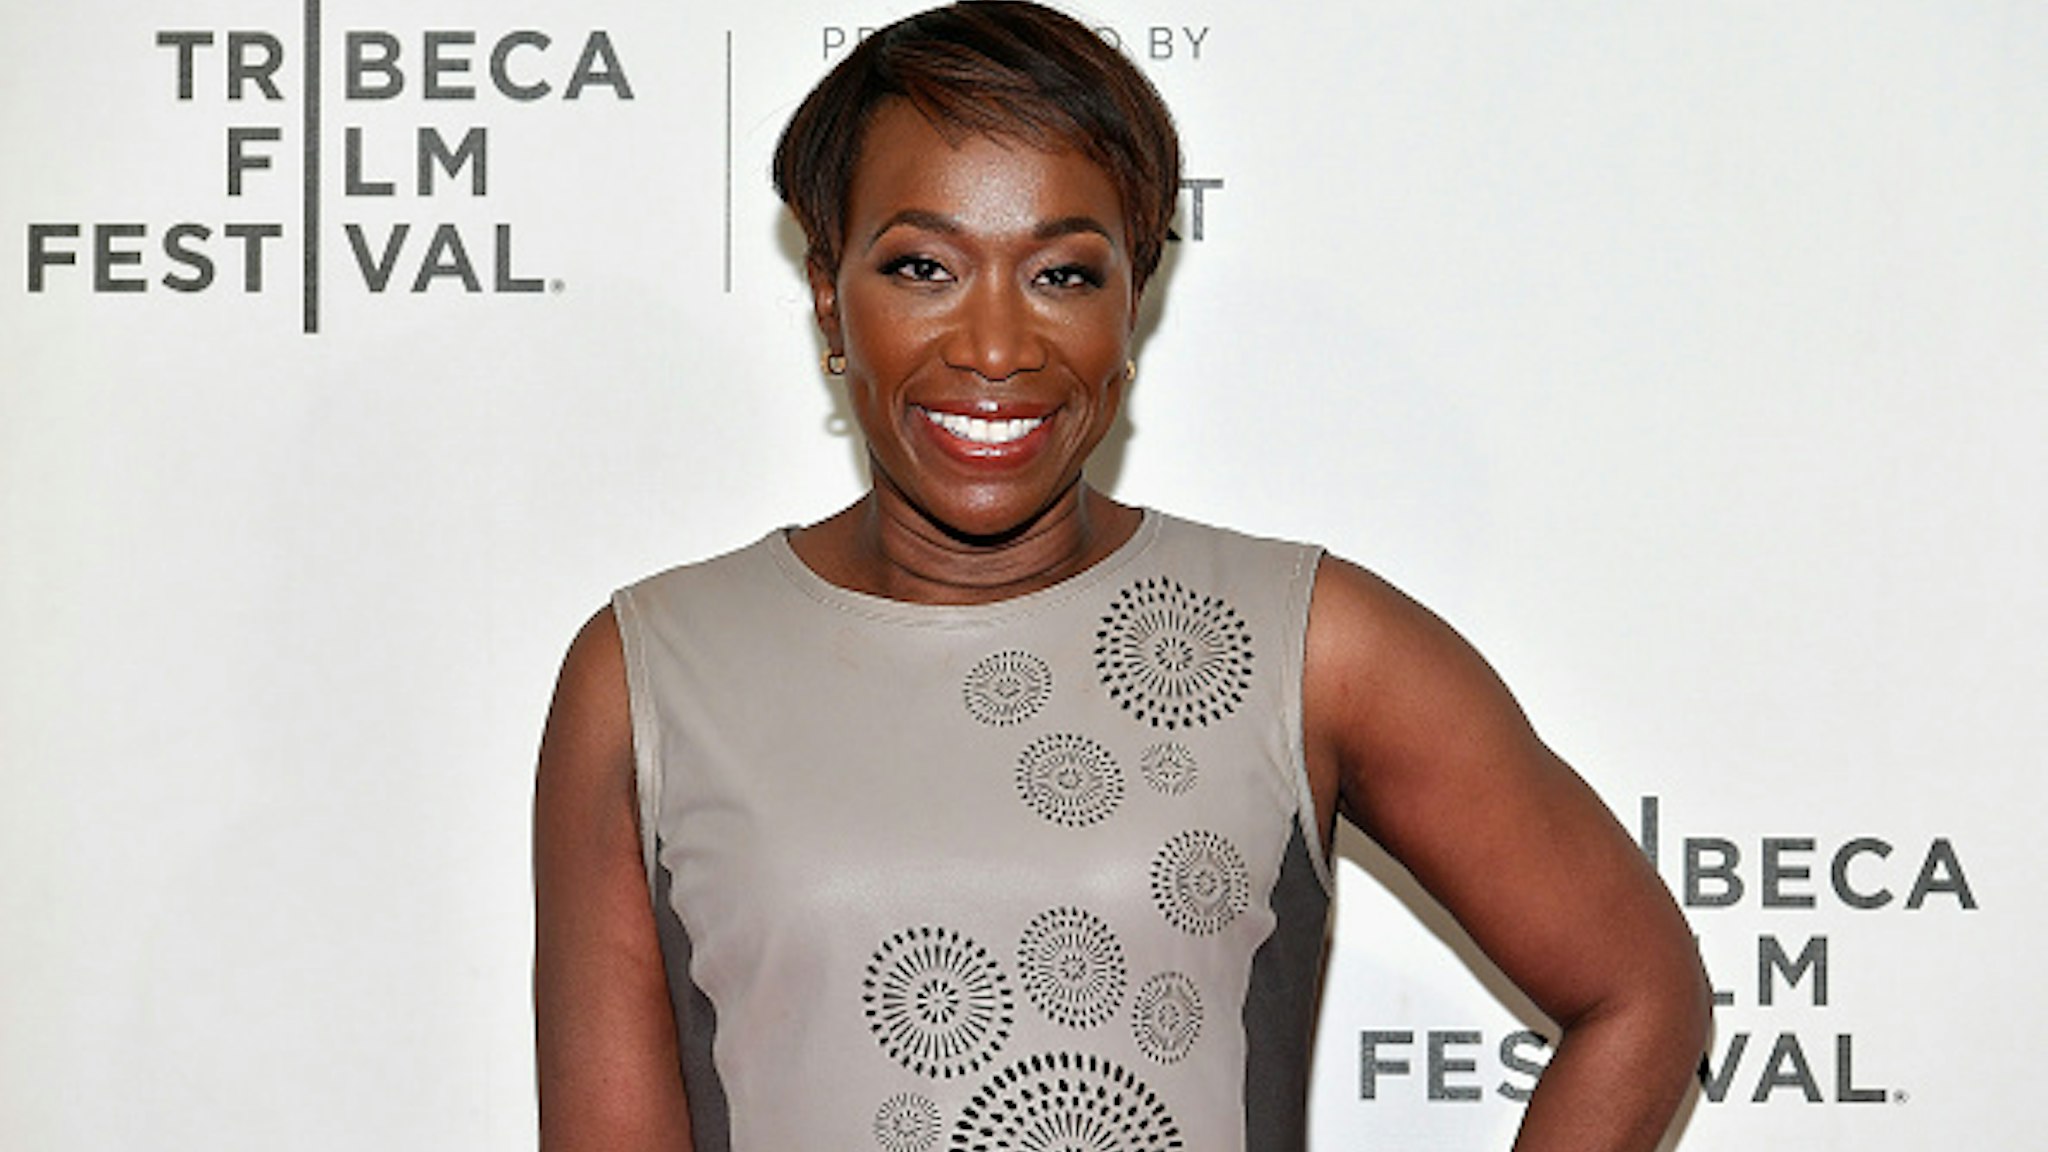 NEW YORK, NY - APRIL 20: Moderator Joy Reid attends the "Rest In Power: The Trayvon Martin Story" premiere during the 2018 Tribeca Film Festival at BMCC Tribeca PAC on April 20, 2018 in New York City.